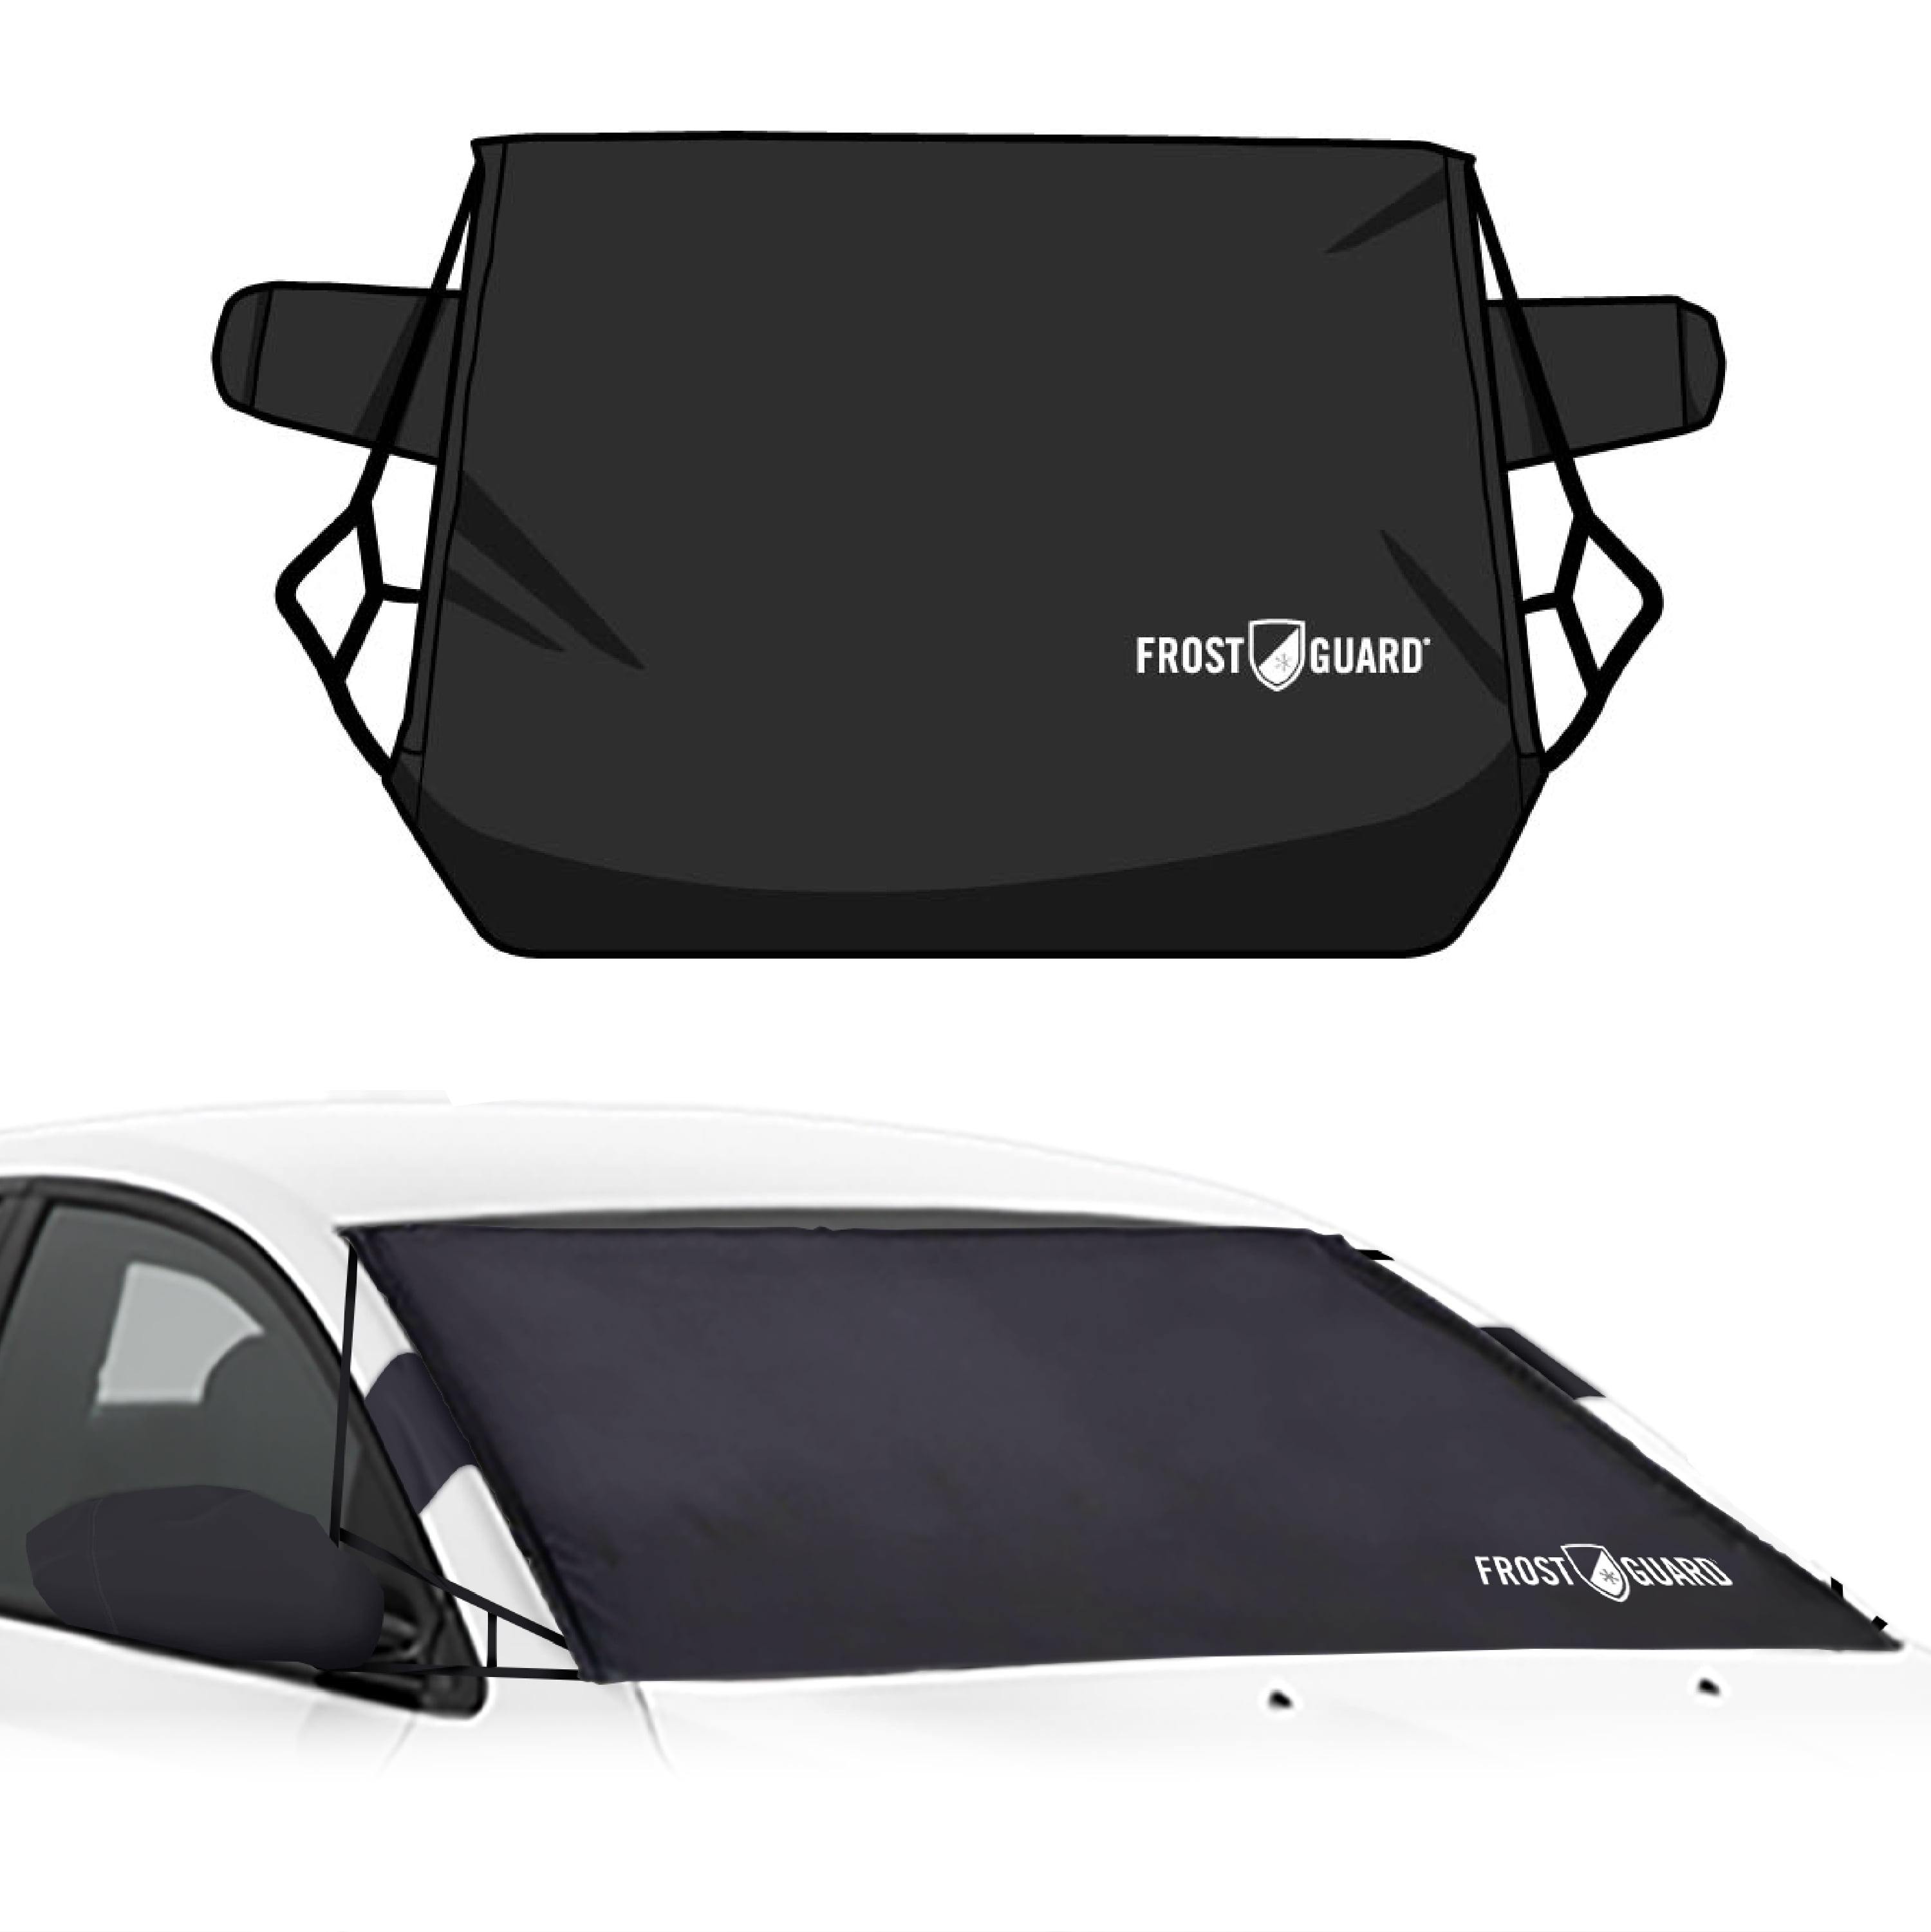 FrostGuard Deluxe Full-Coverage Car Windshield Cover for Ice/Snow, Sweater,  41 x 59 